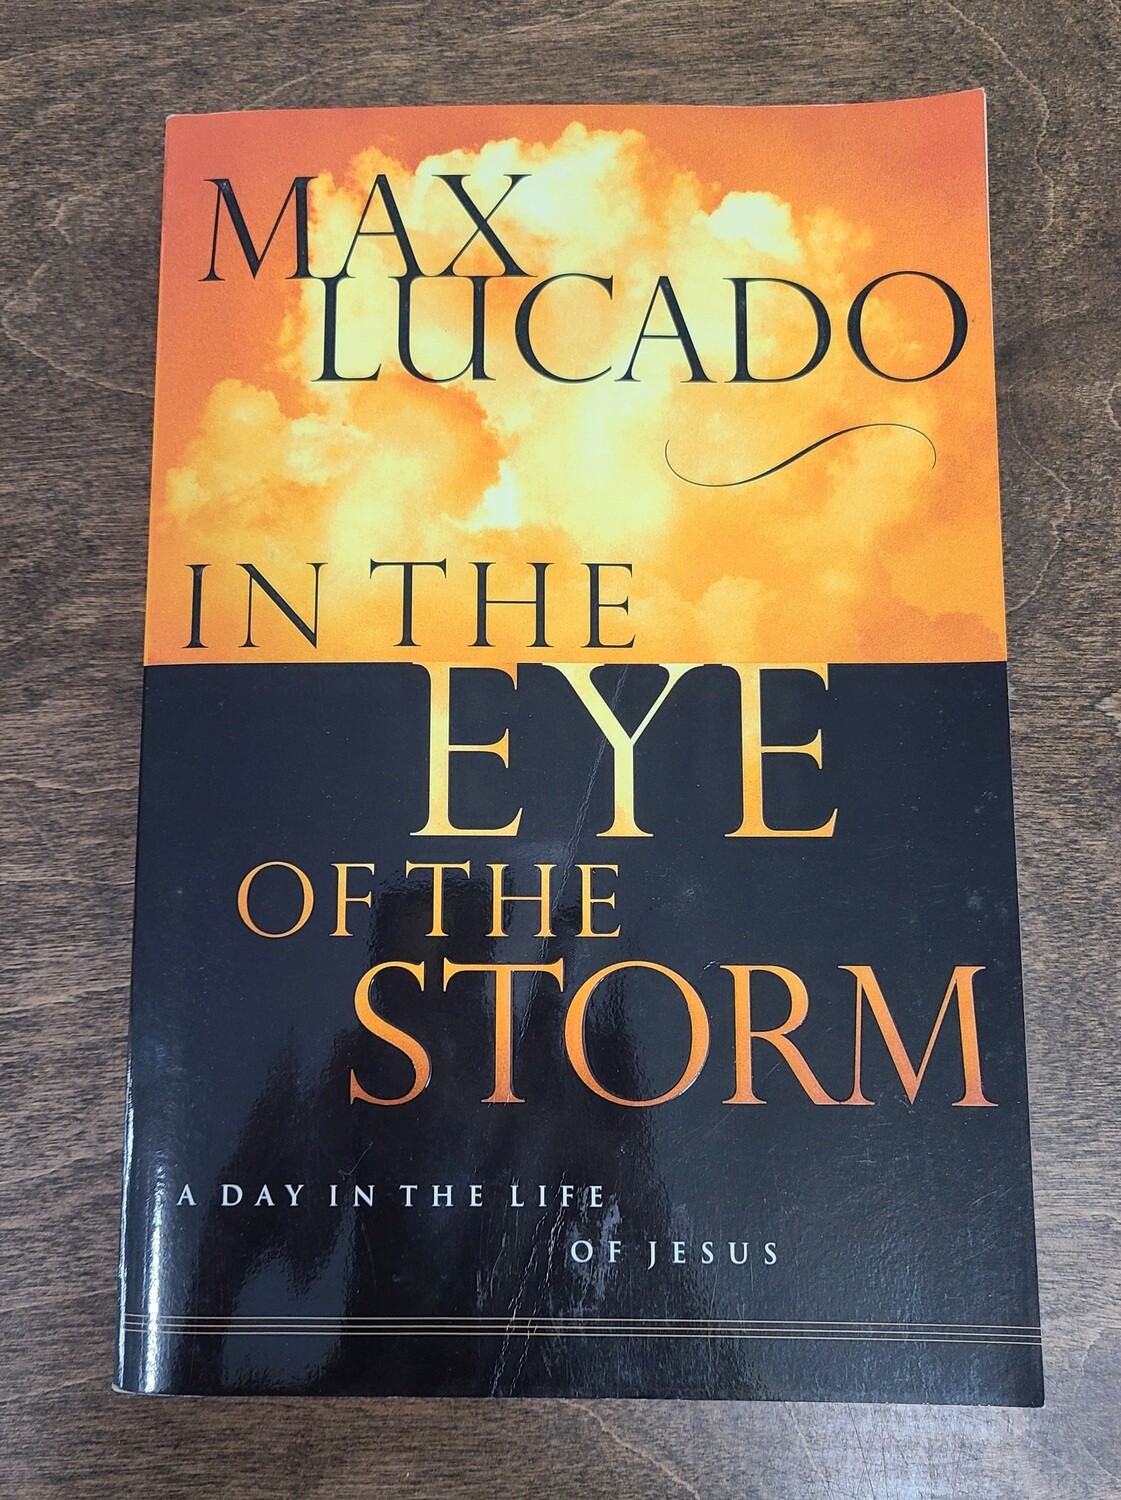 In The Eye of the Storm by Max Lucado